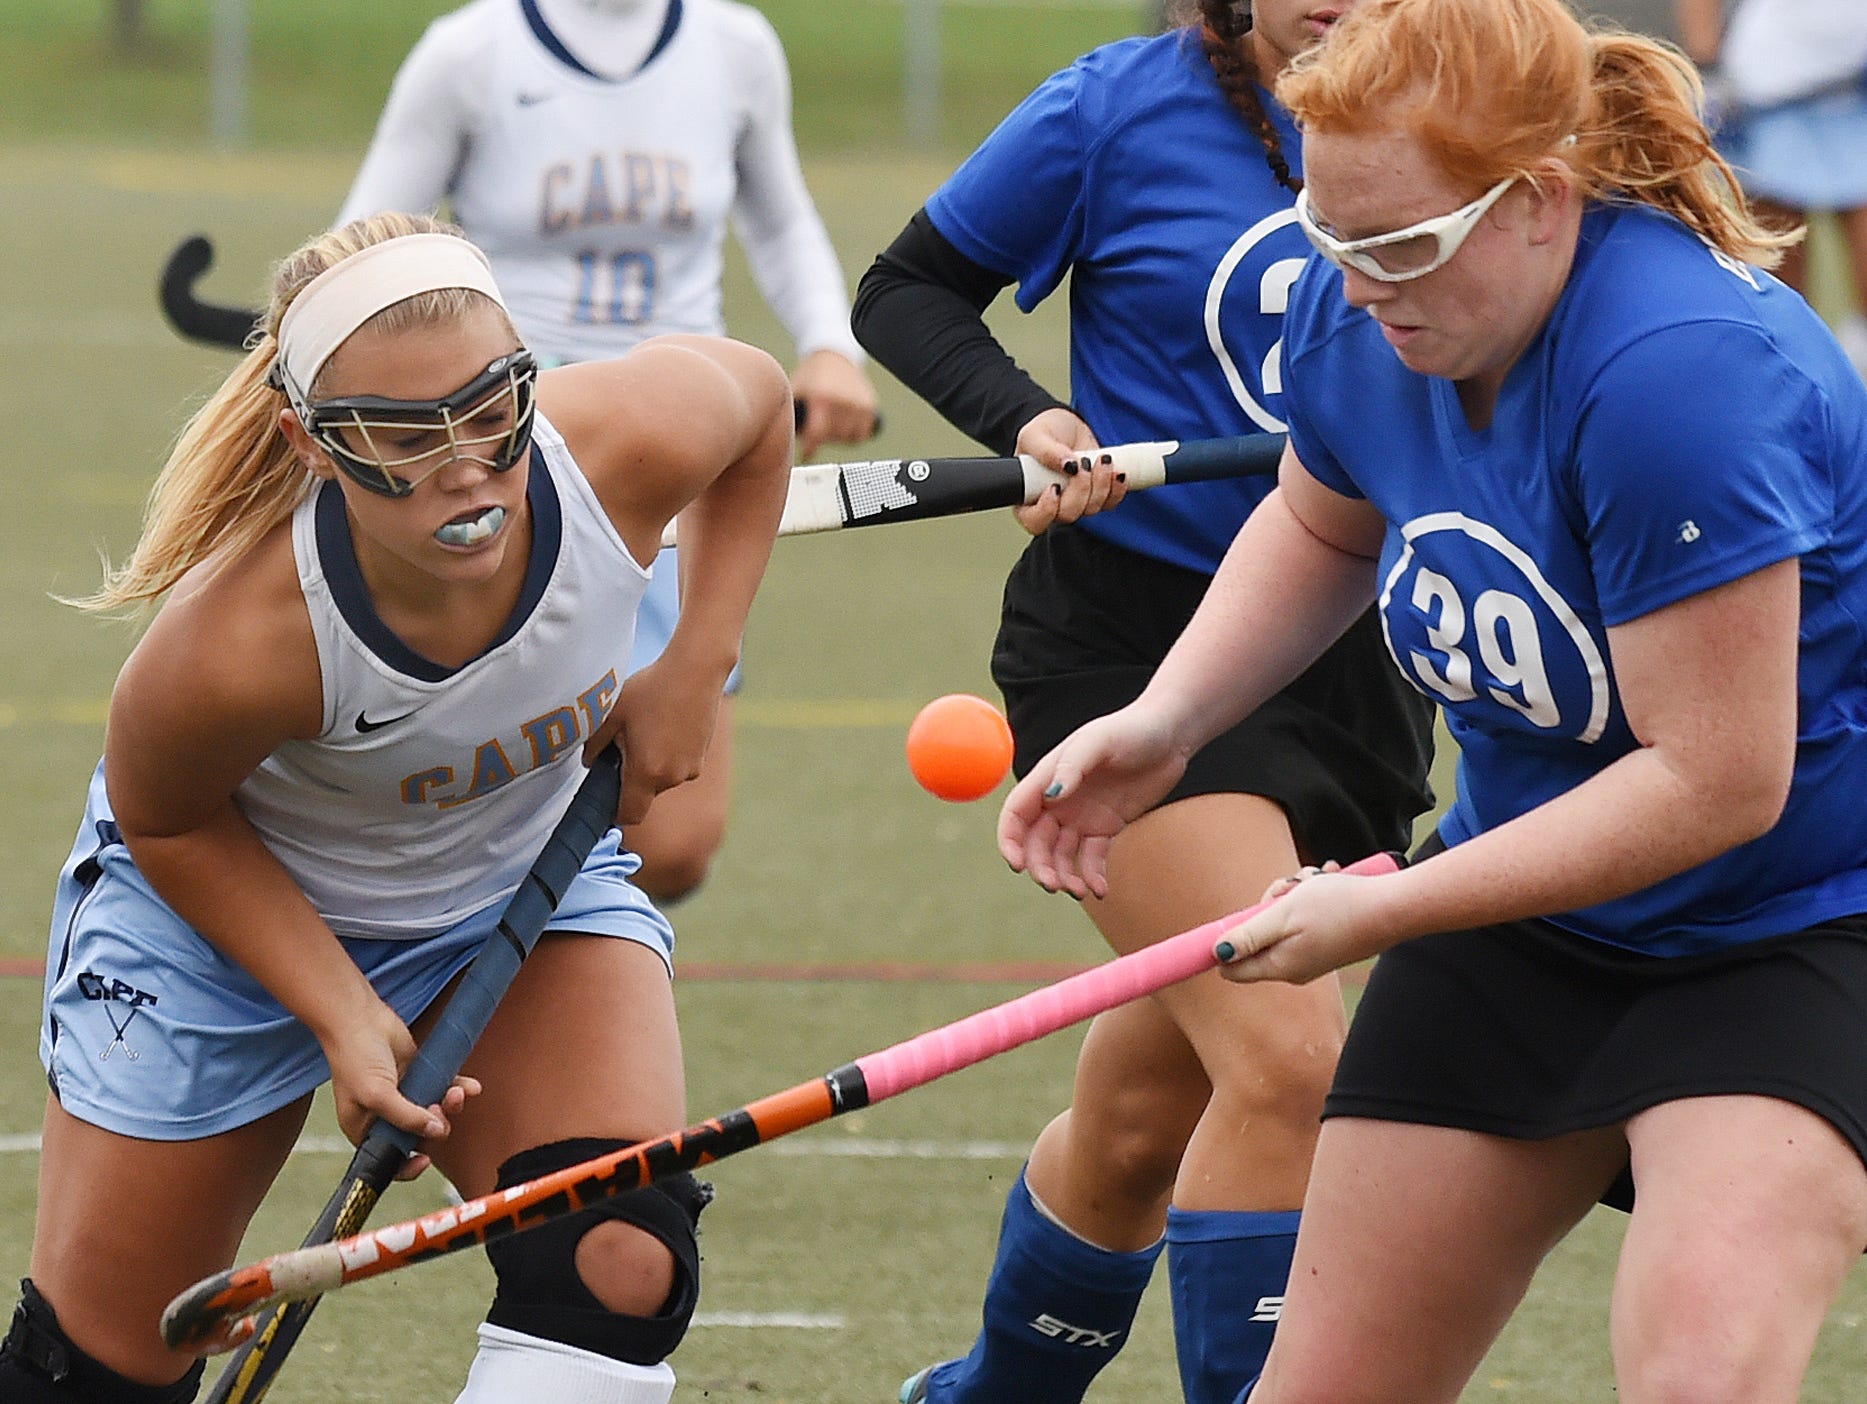 Brandywine's Laurel Bradley and Cape's Sydney Ostroski fight for the ball as Cape Henlopen High School (white) hosted Brandywine HS (blue) in the 1st round of the Delaware State HS Hockey Tournament at the school near Lewes on Wednesday November 11.